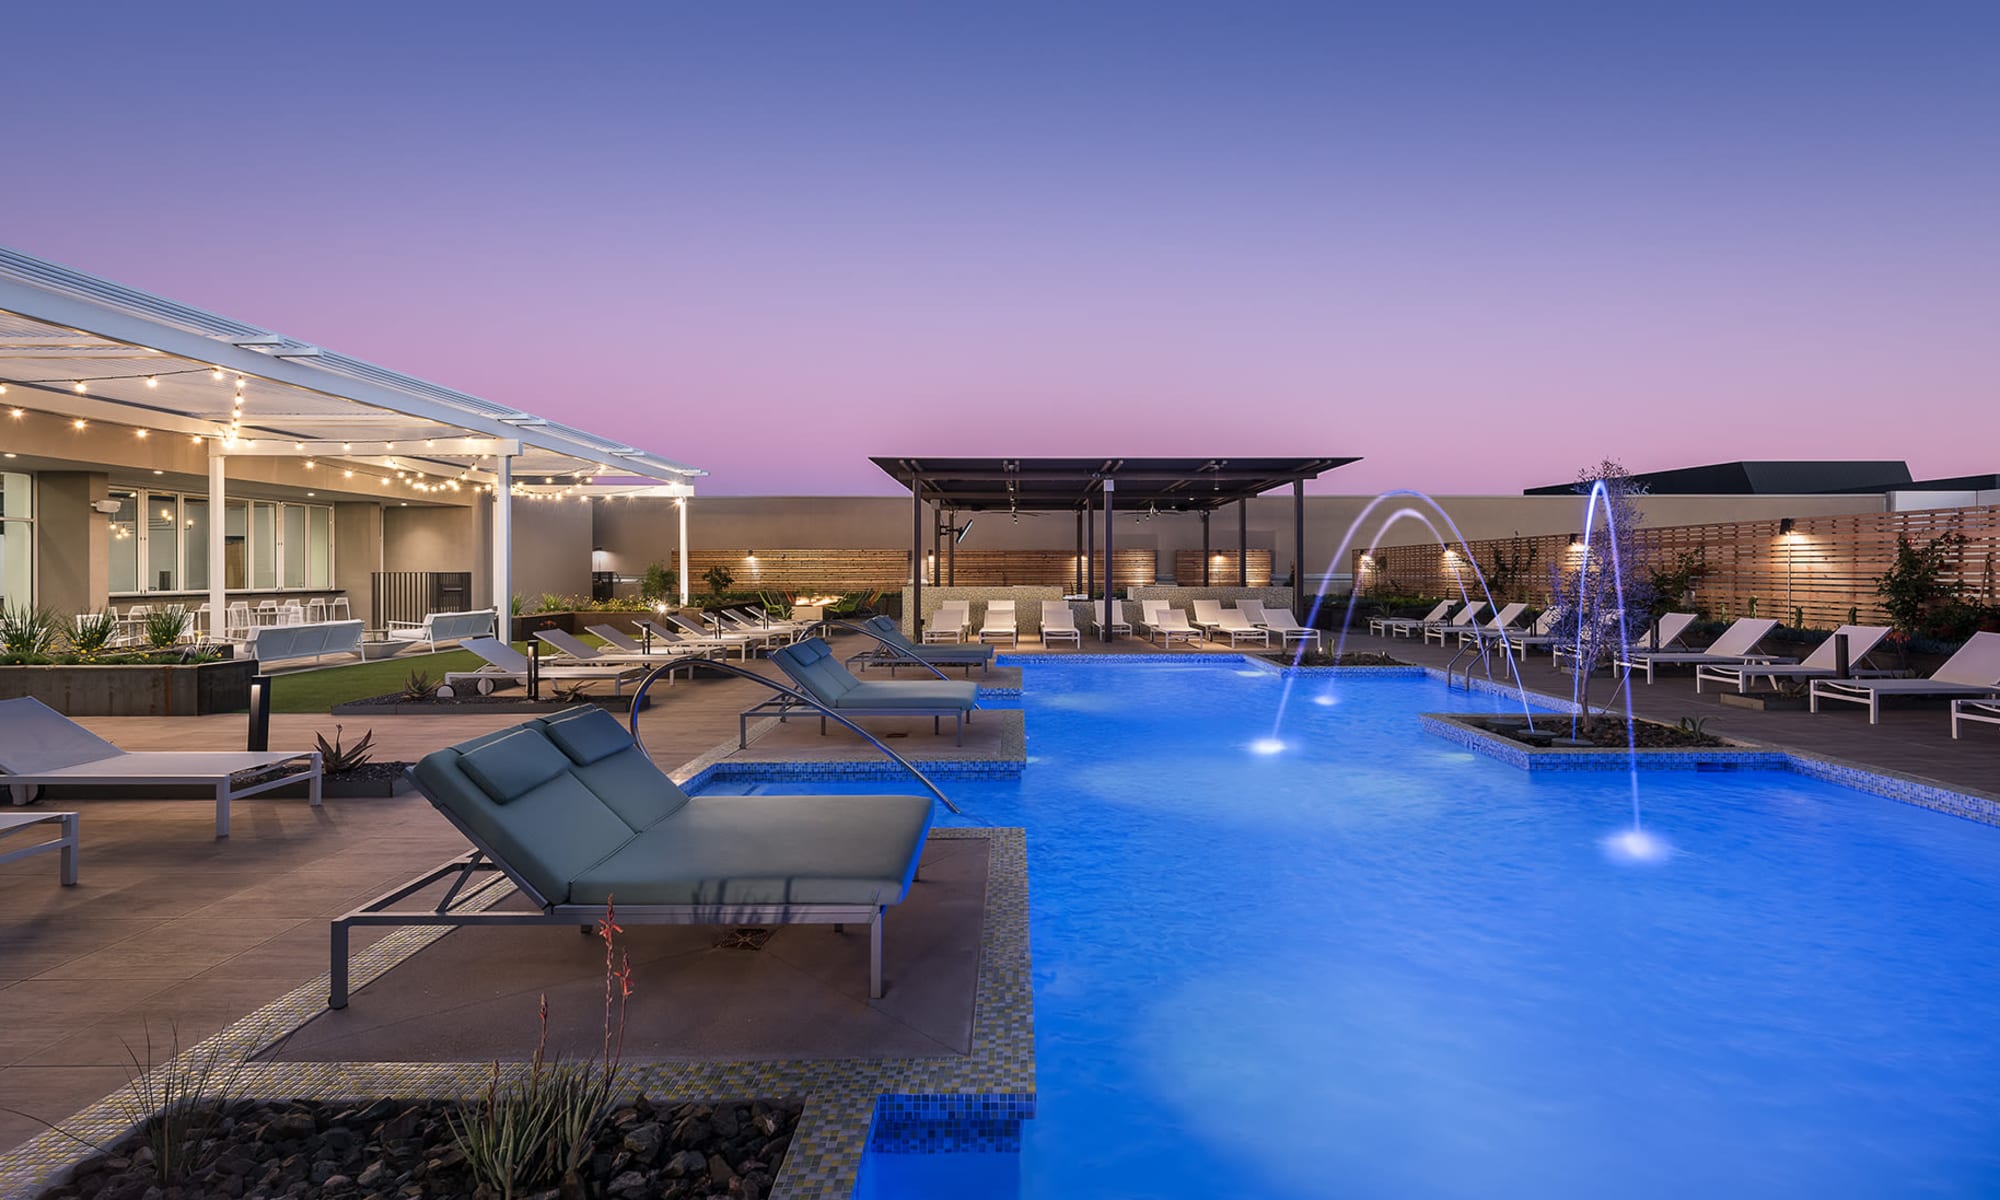 Resort-style swimming pool and outdoor amenity area at The Piedmont in Tempe, Arizona